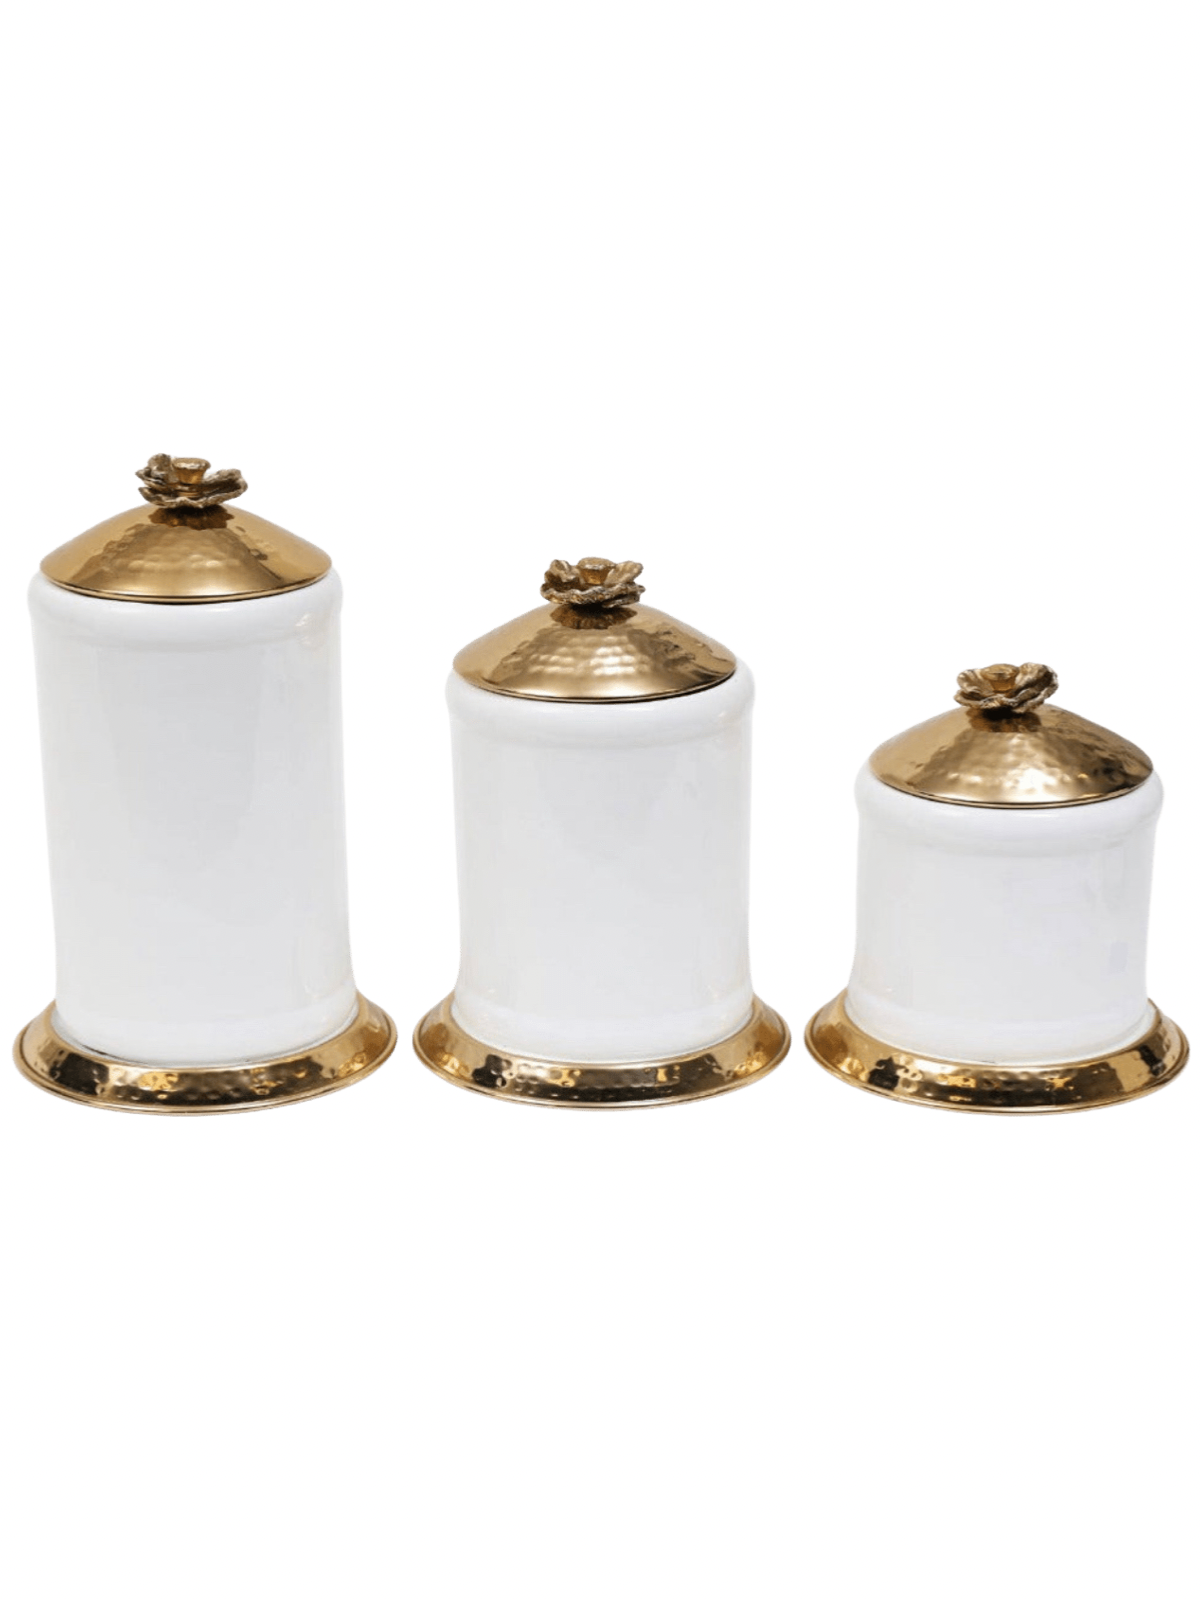 Luxury white ceramic canisters with gold base and gold hammered lid with floral details, 3 Sizes - KYA Home Decor.